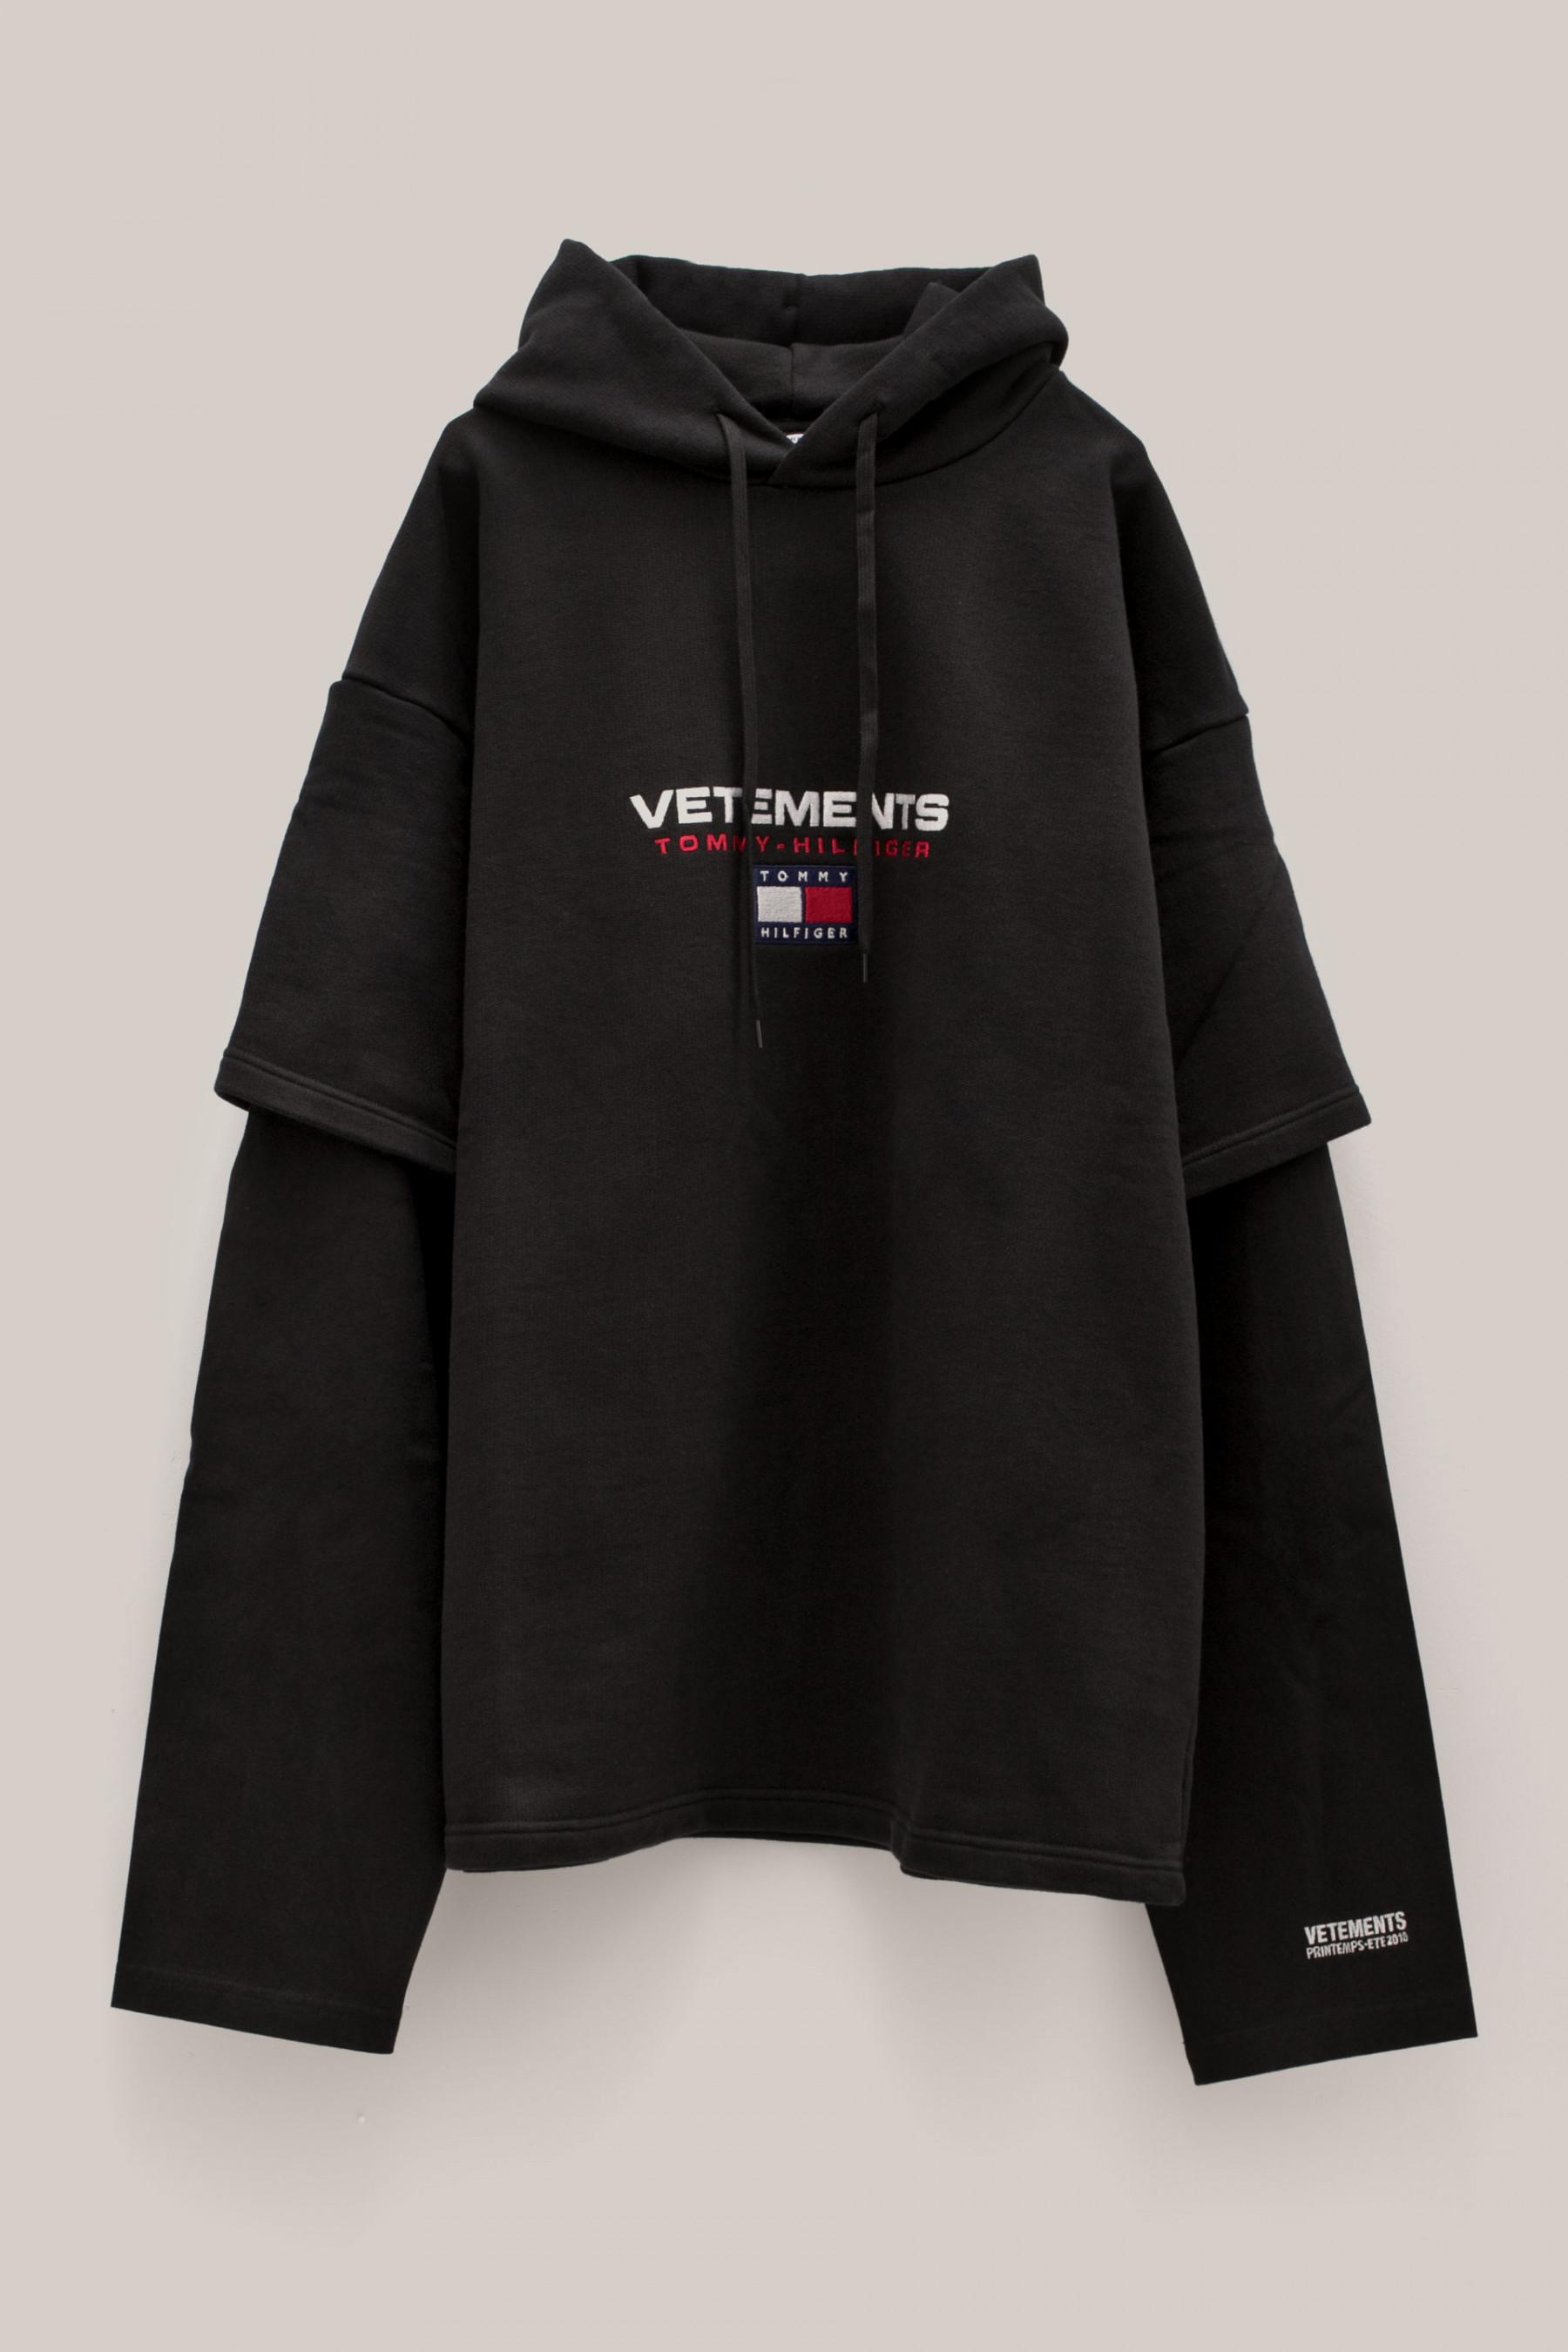 vetements x tommy hoodie Off 69% - canerofset.com